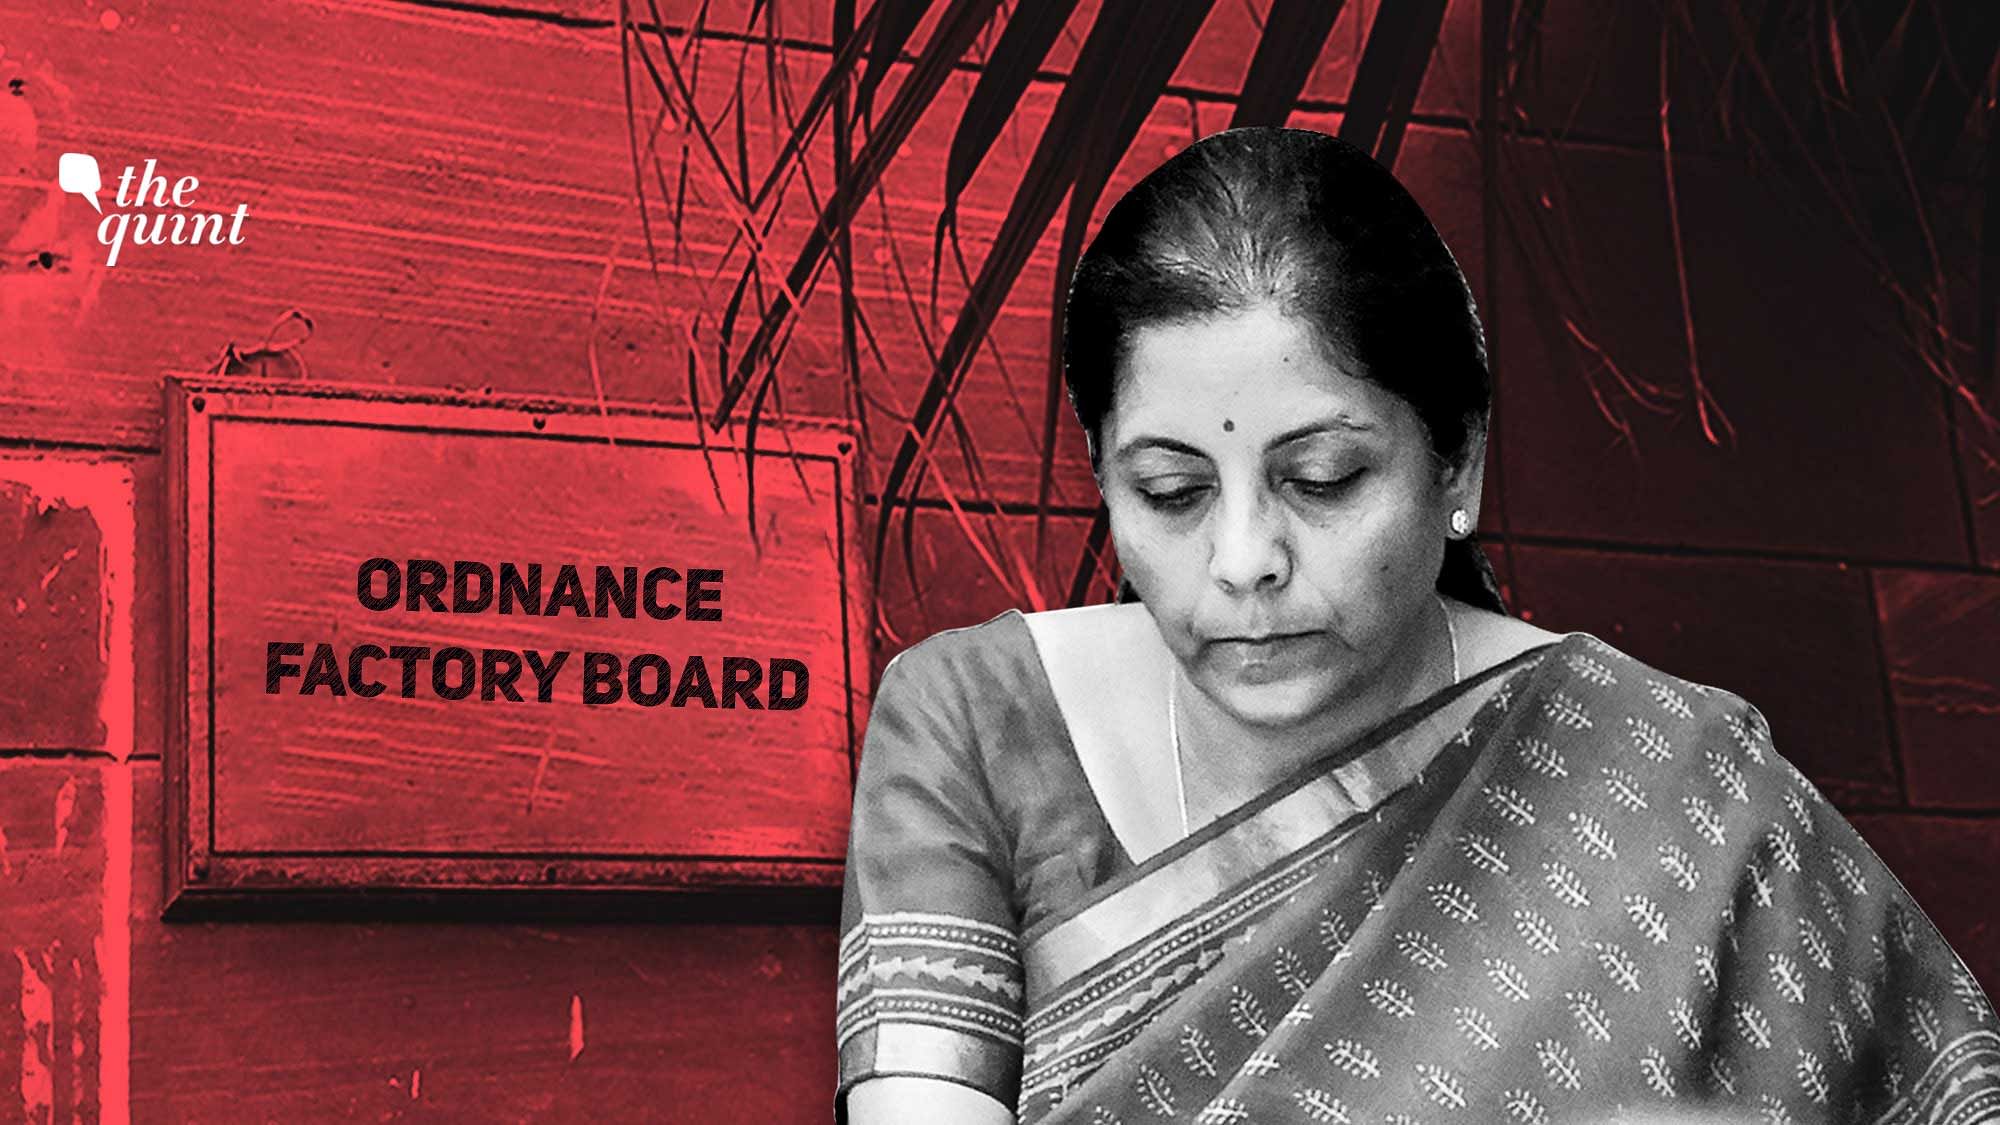 On 16 May, Finance Minister Nirmala Sitharaman approved the corporatisation of OFB to help improve its autonomy, efficiency, and accountability.